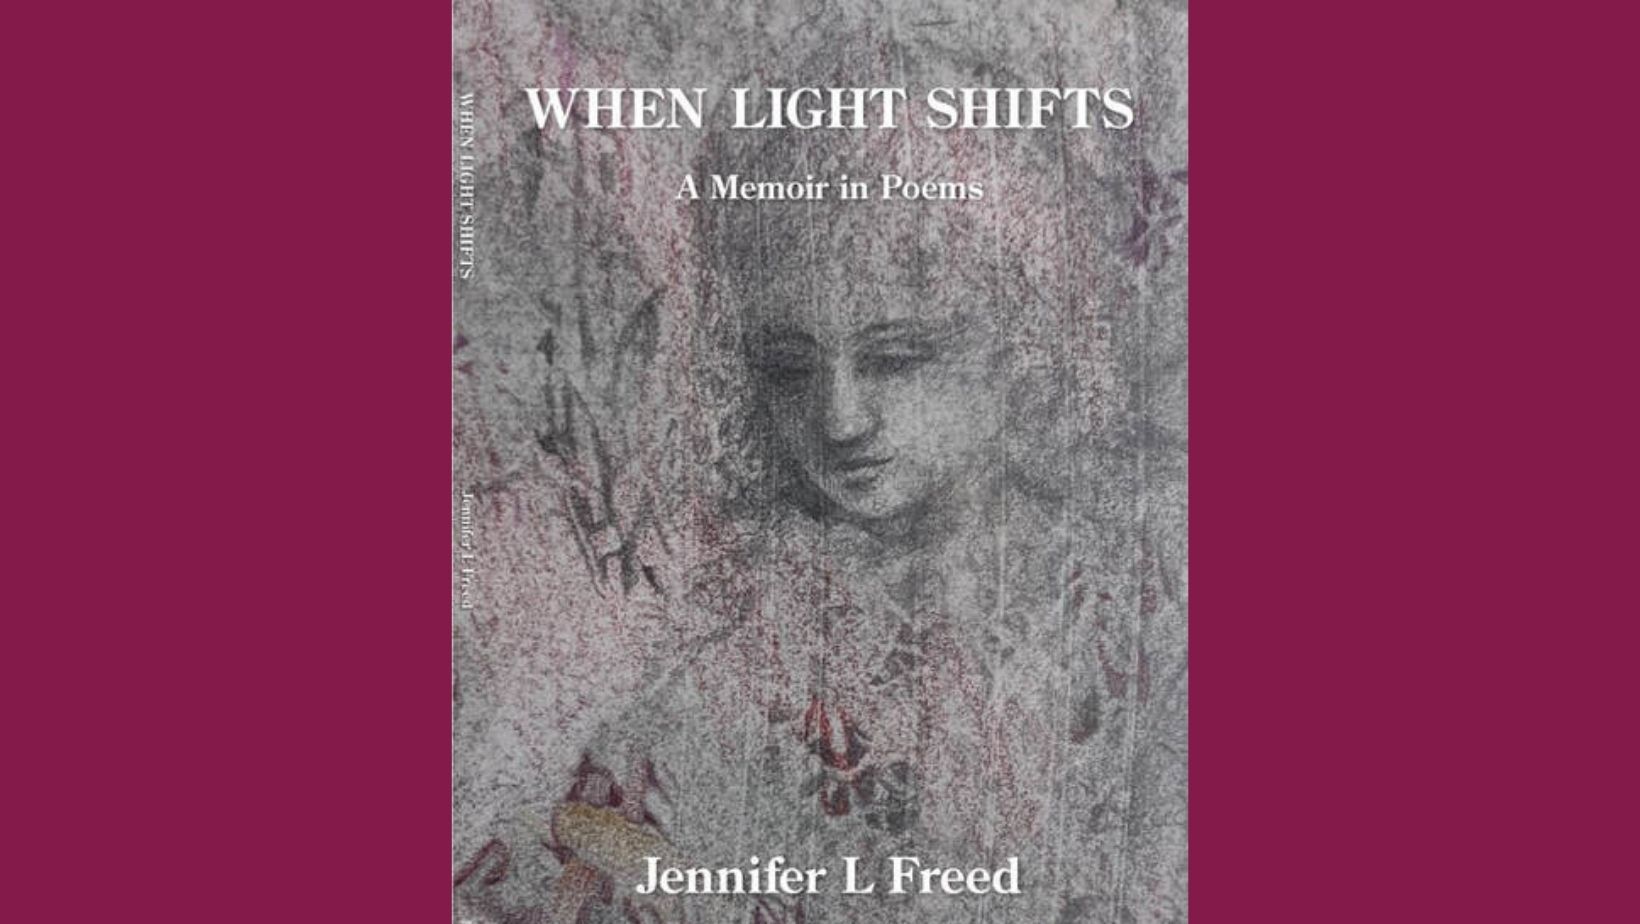 Congratulations to Jennifer Freed on her new book